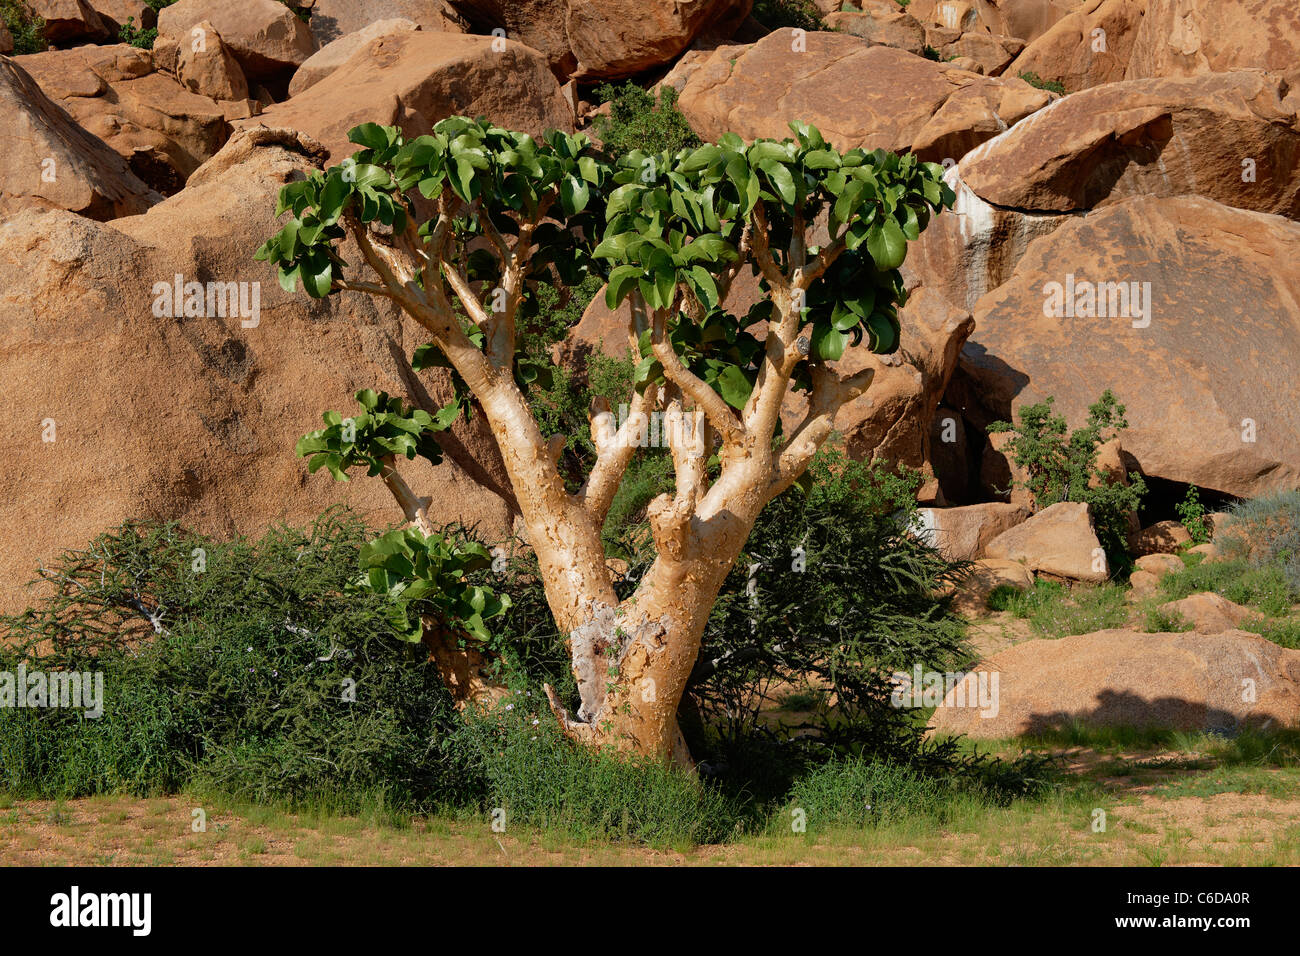 cobas tree or butter tree, succulent tree, Cyphostemma currorii, Spitzkoppe, mountain landscape with granite rocks, Namibia Stock Photo